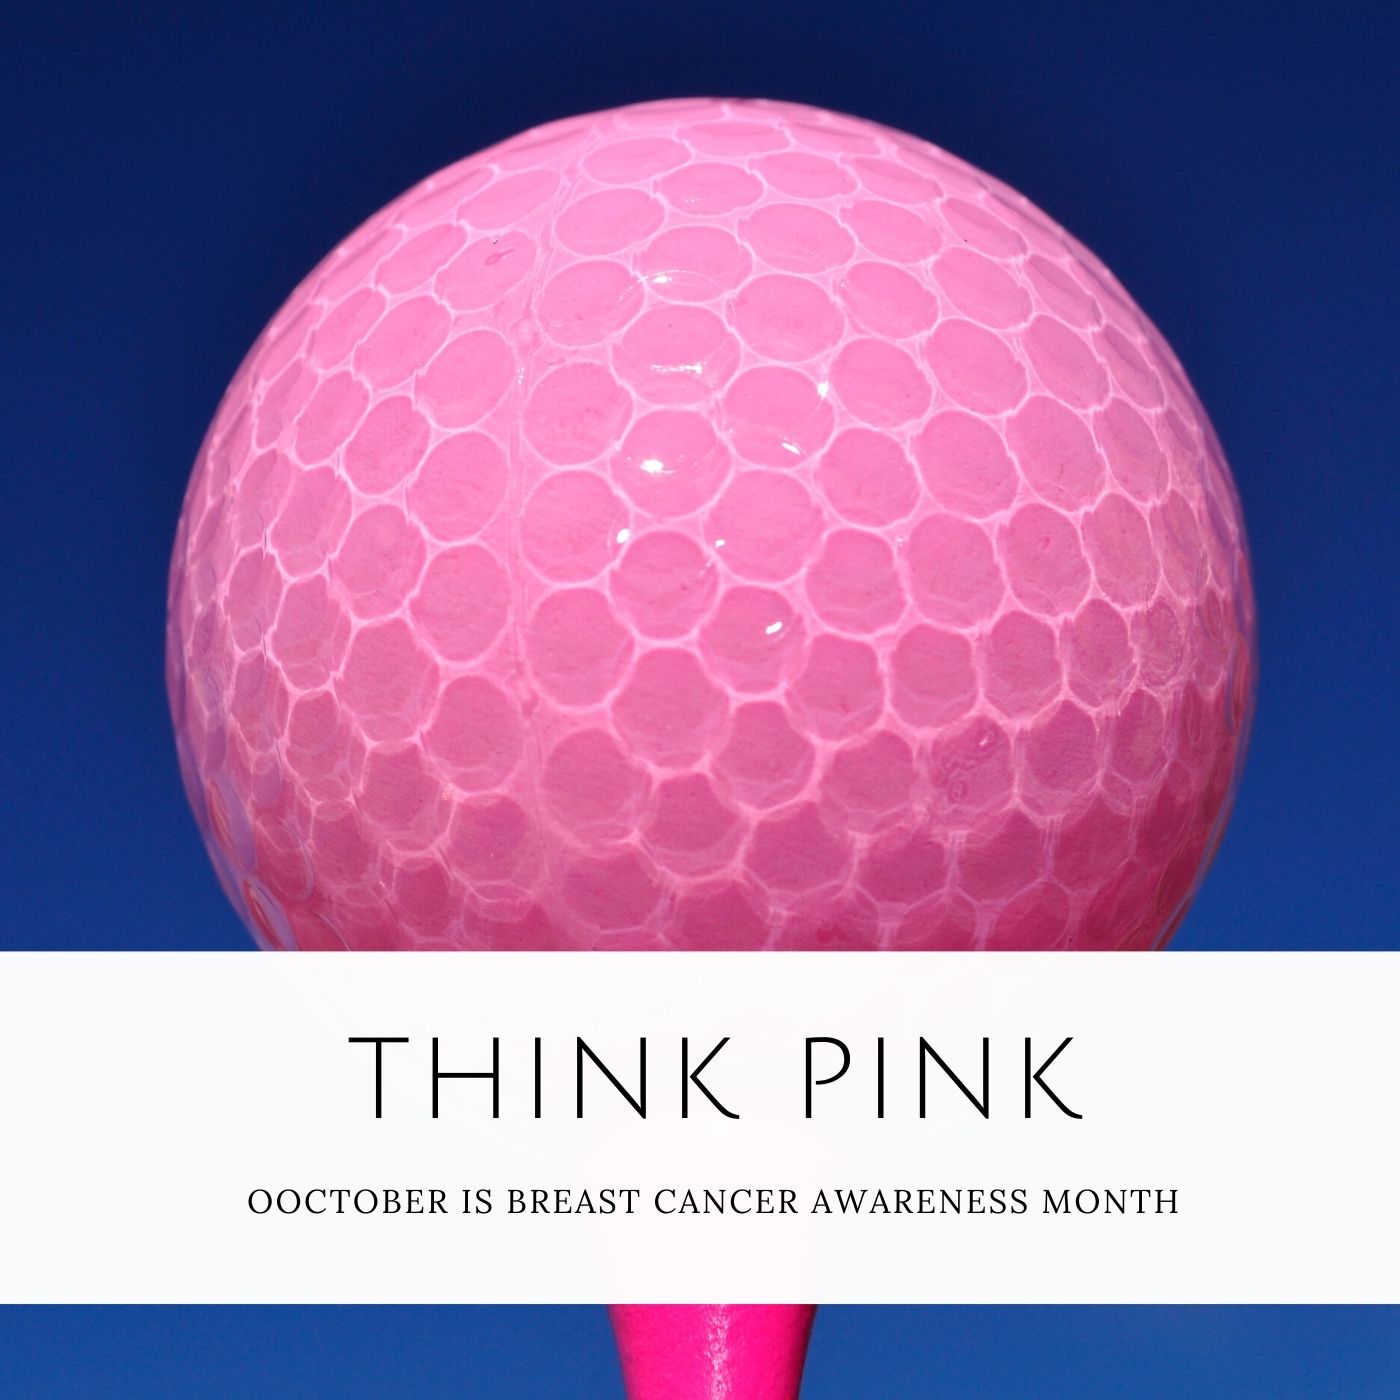 Pink Golf Grips and Golf Items for Breast Cancer Awareness Month